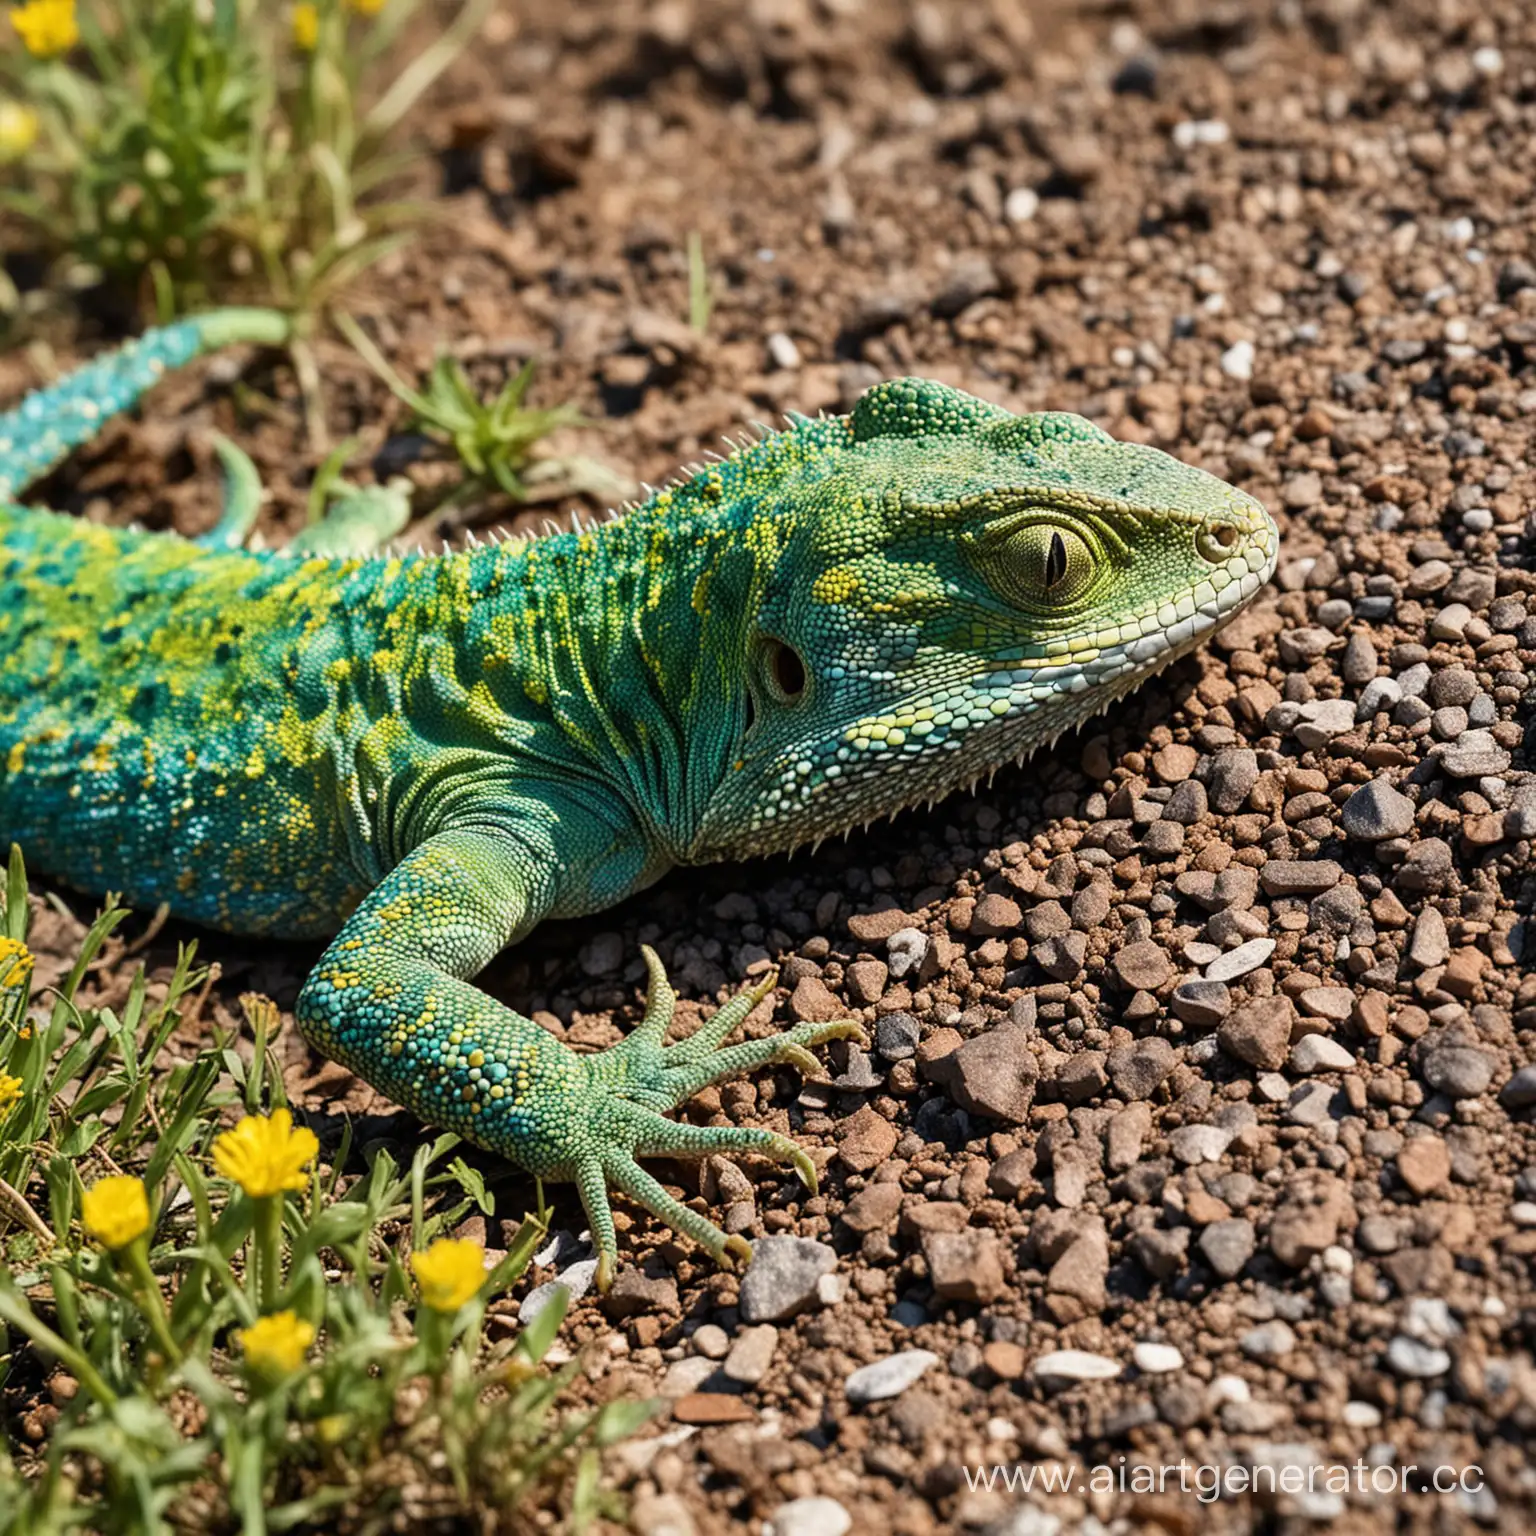 Colorful-MirrorScaled-Lizard-in-Blossoming-Field